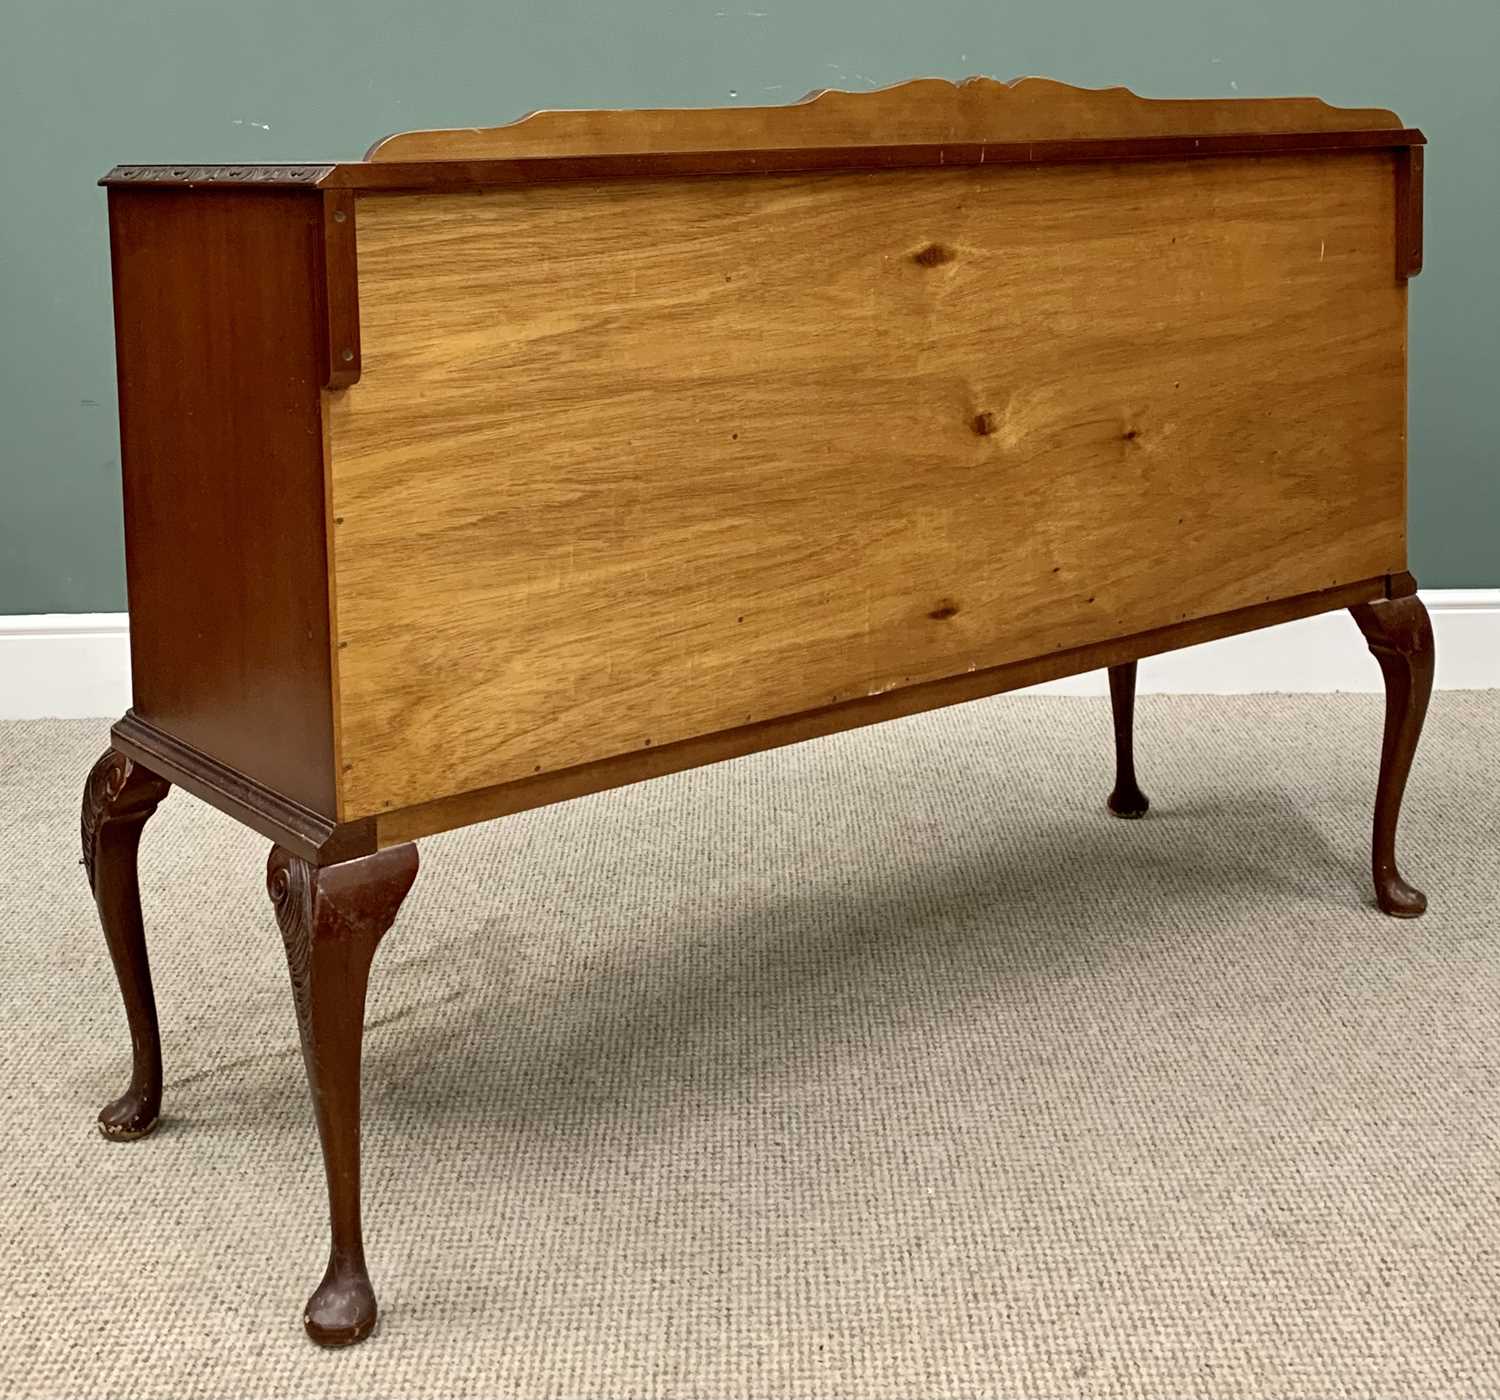 MAHOGANY RAILBACK SIDEBOARD - 20th Century in Regency style with three central drawers and two - Image 2 of 5